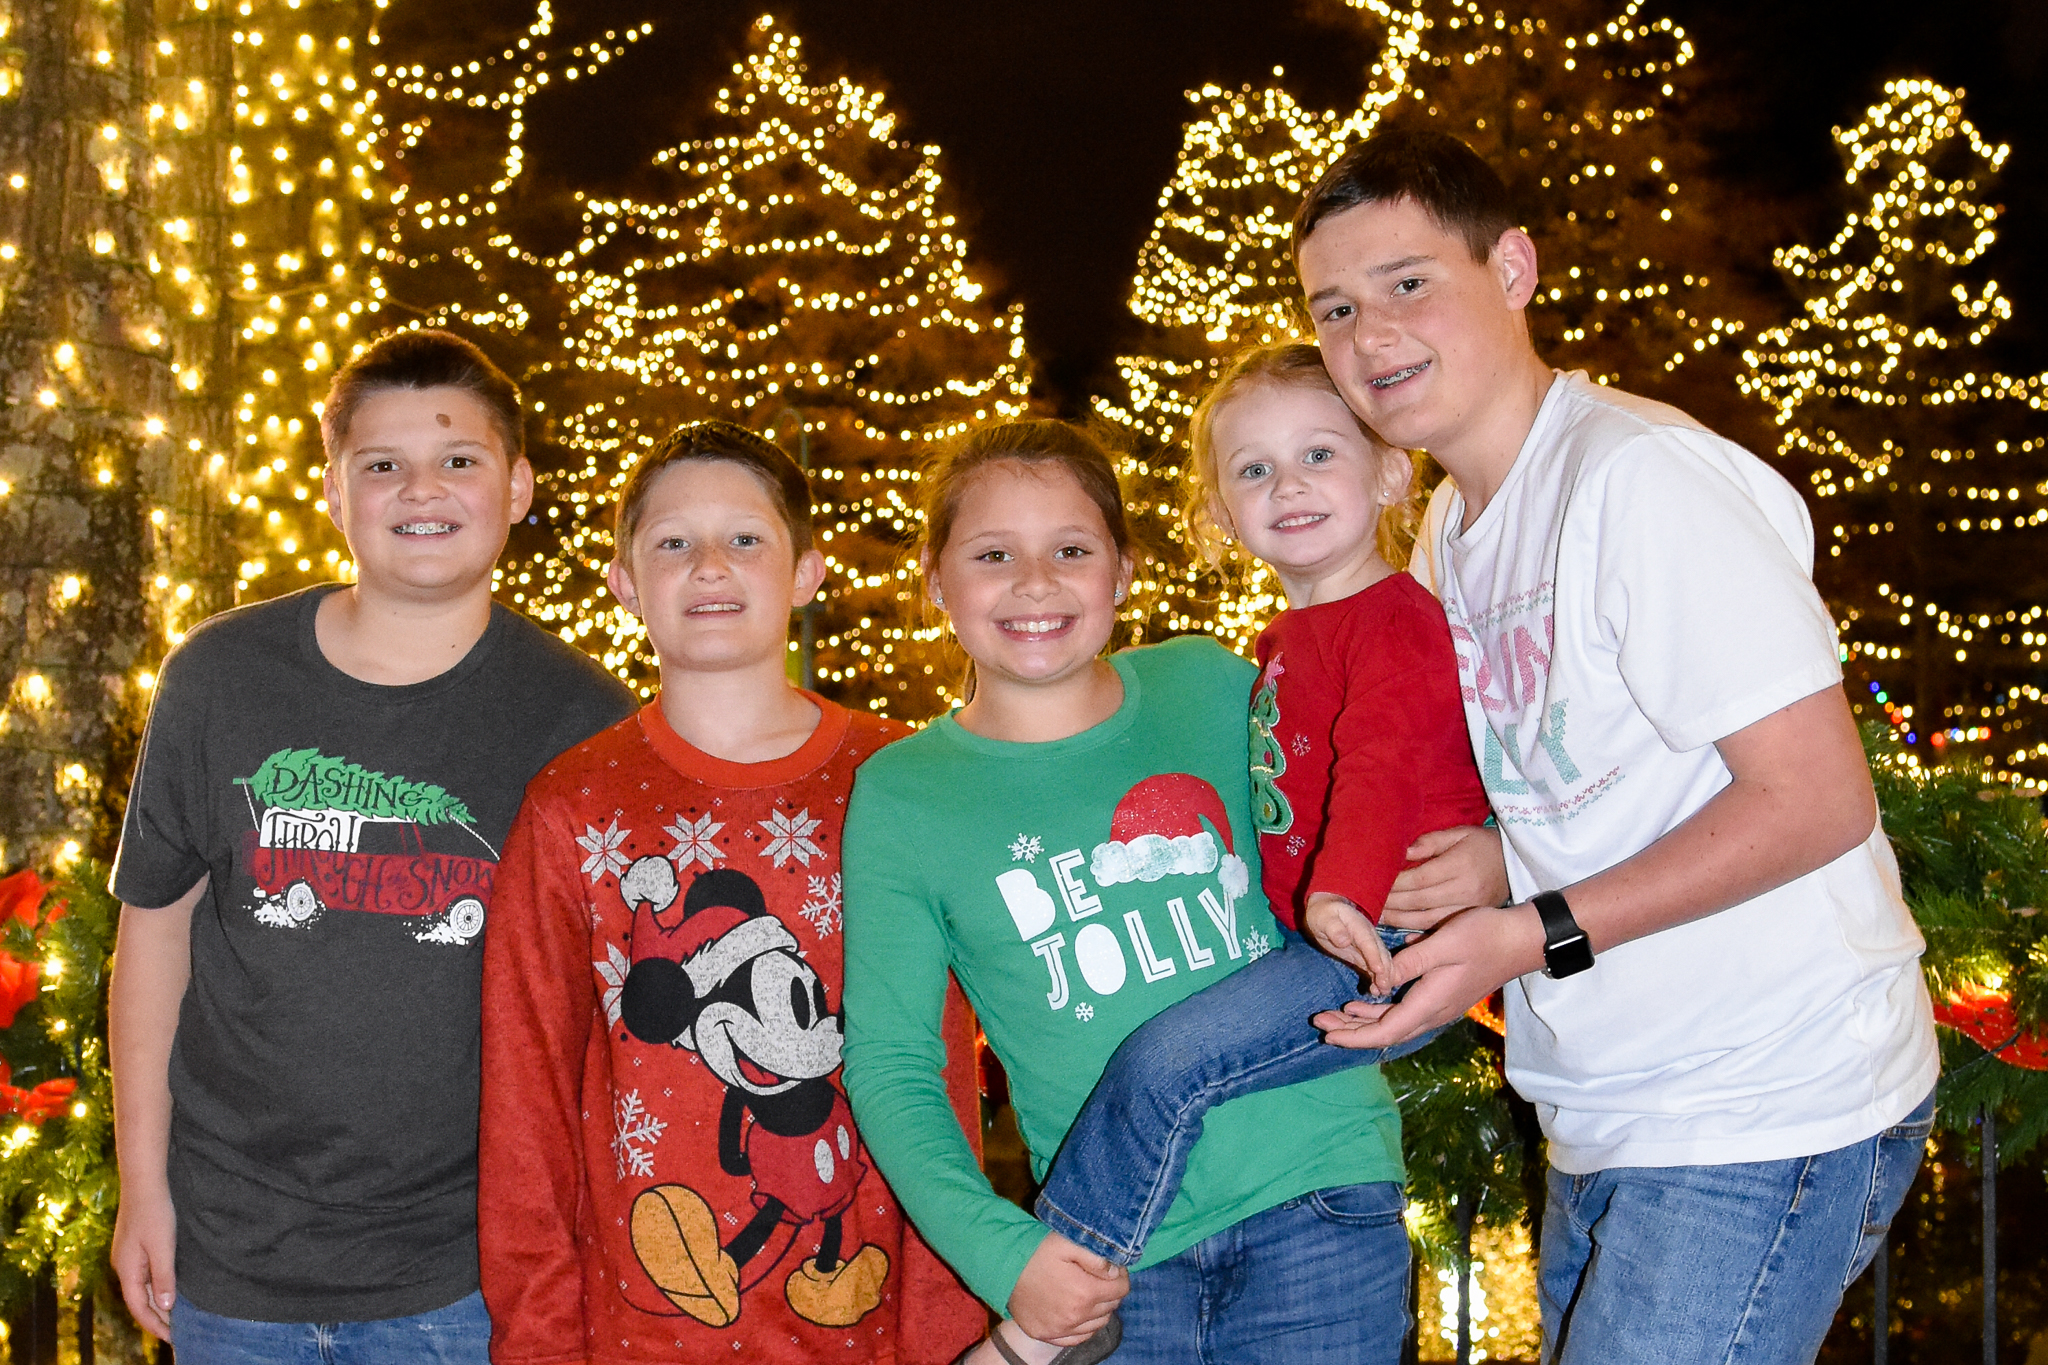 WinterFest at Carowinds Christmas lights in Charlotte